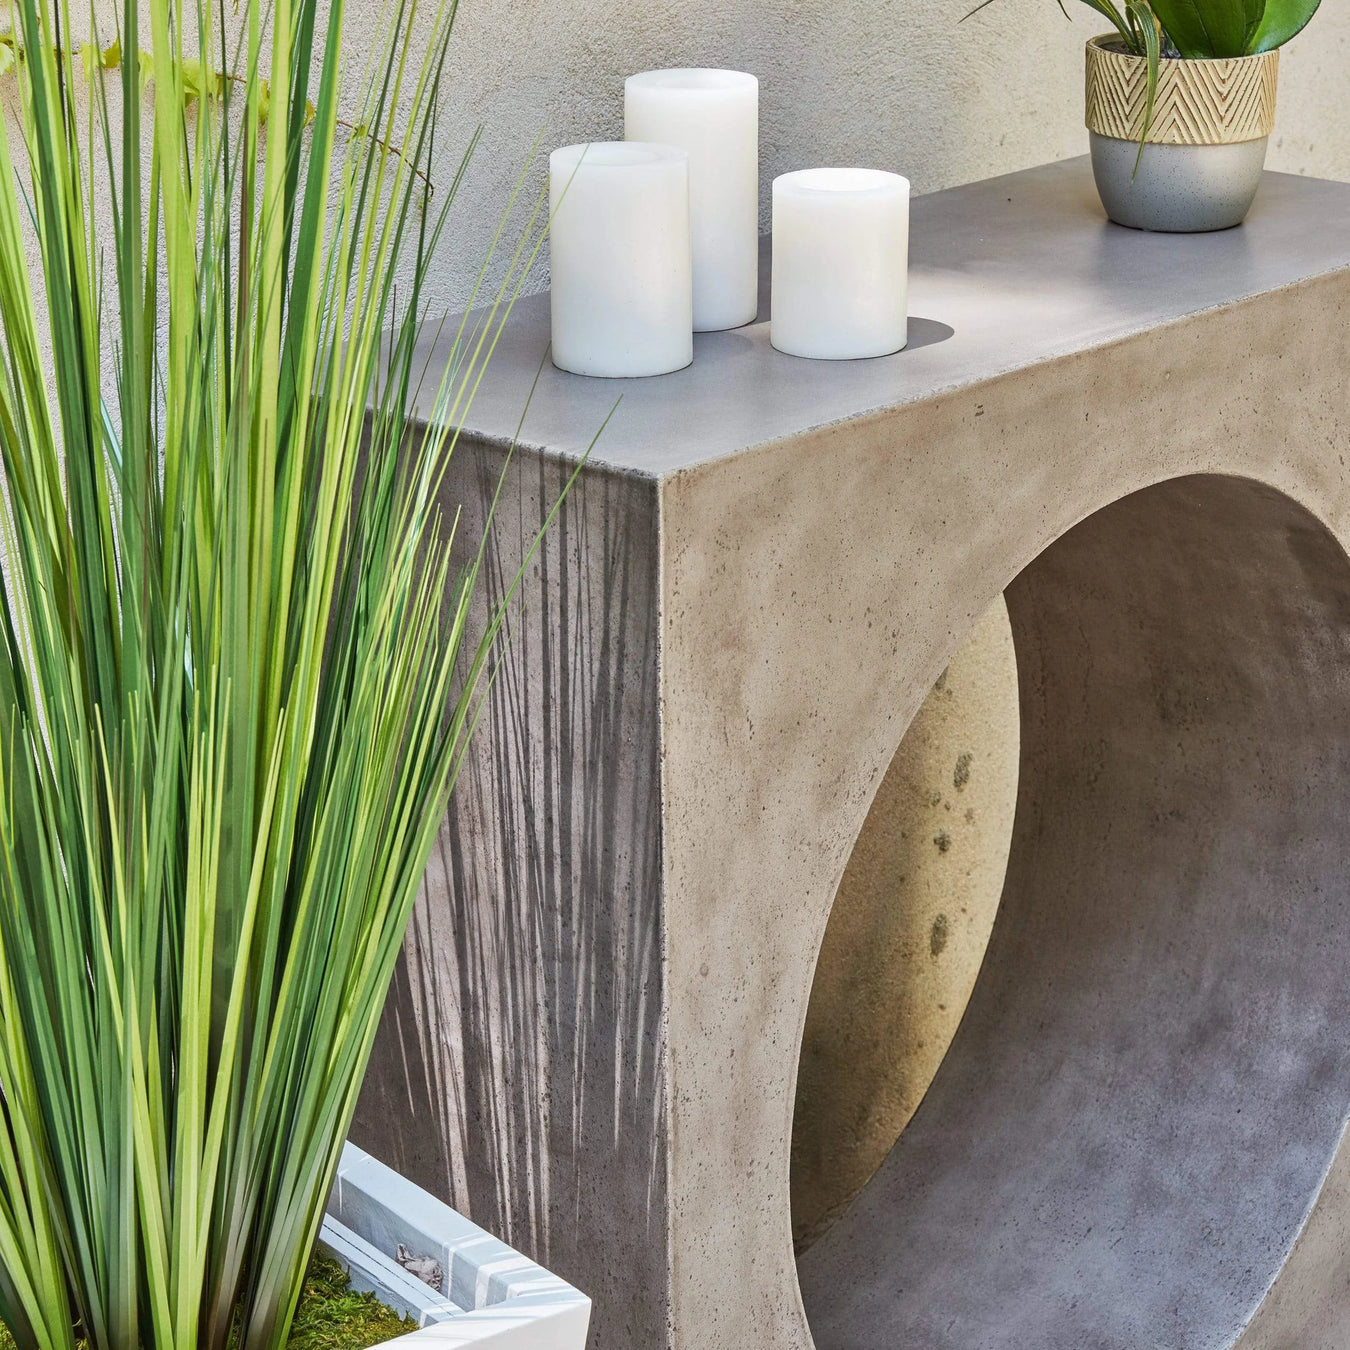 Concrete is grounding, strong and versatile in outdoor spaces